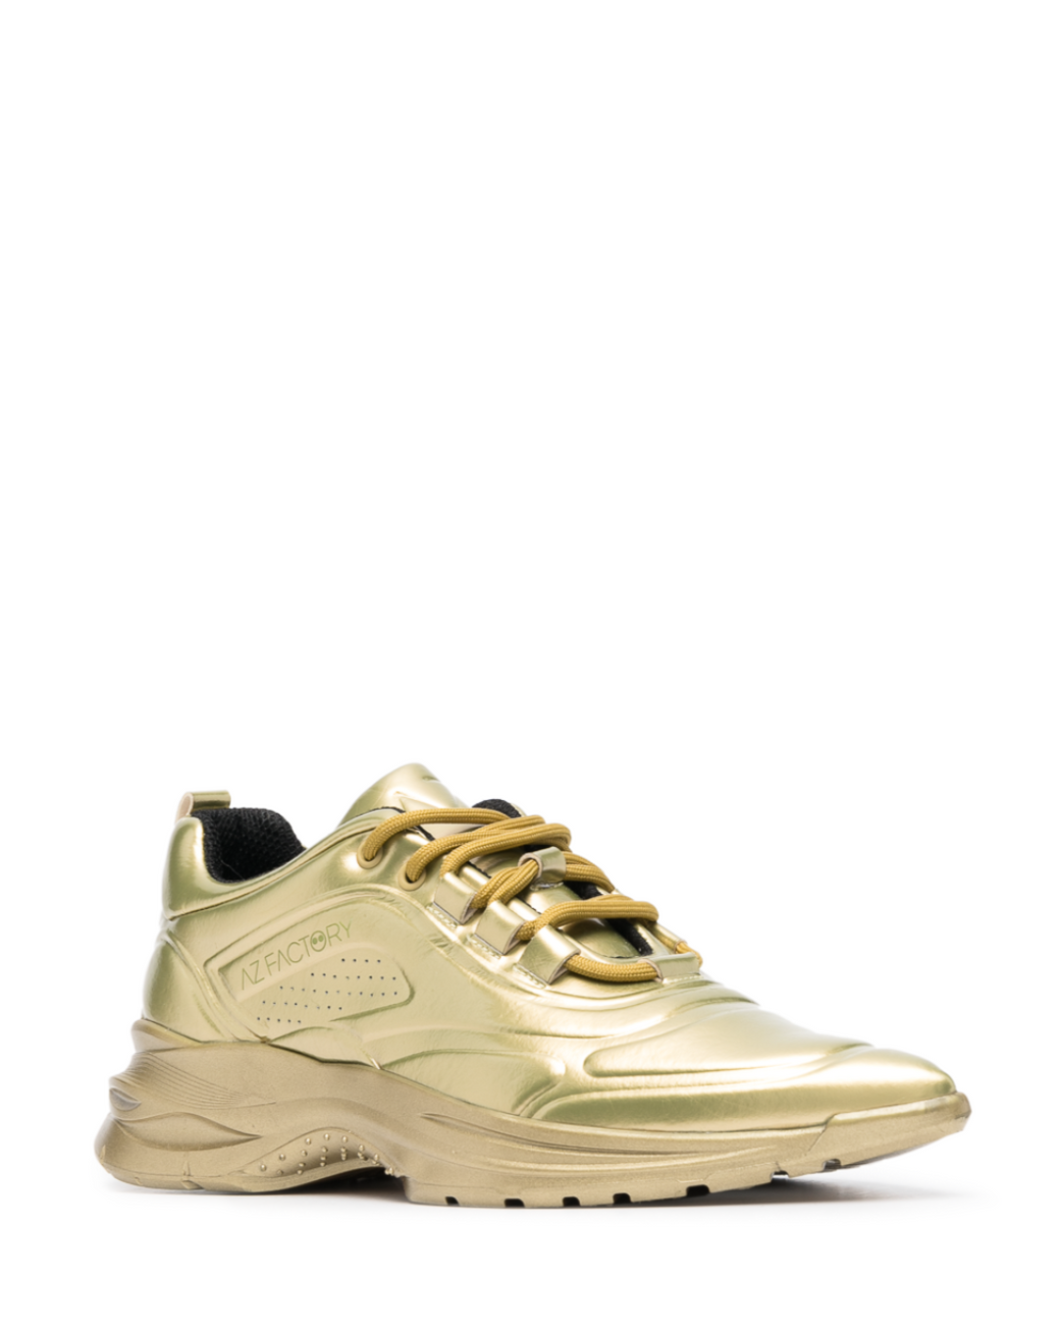 POINTY SNEAKS 1.2 - GOLD